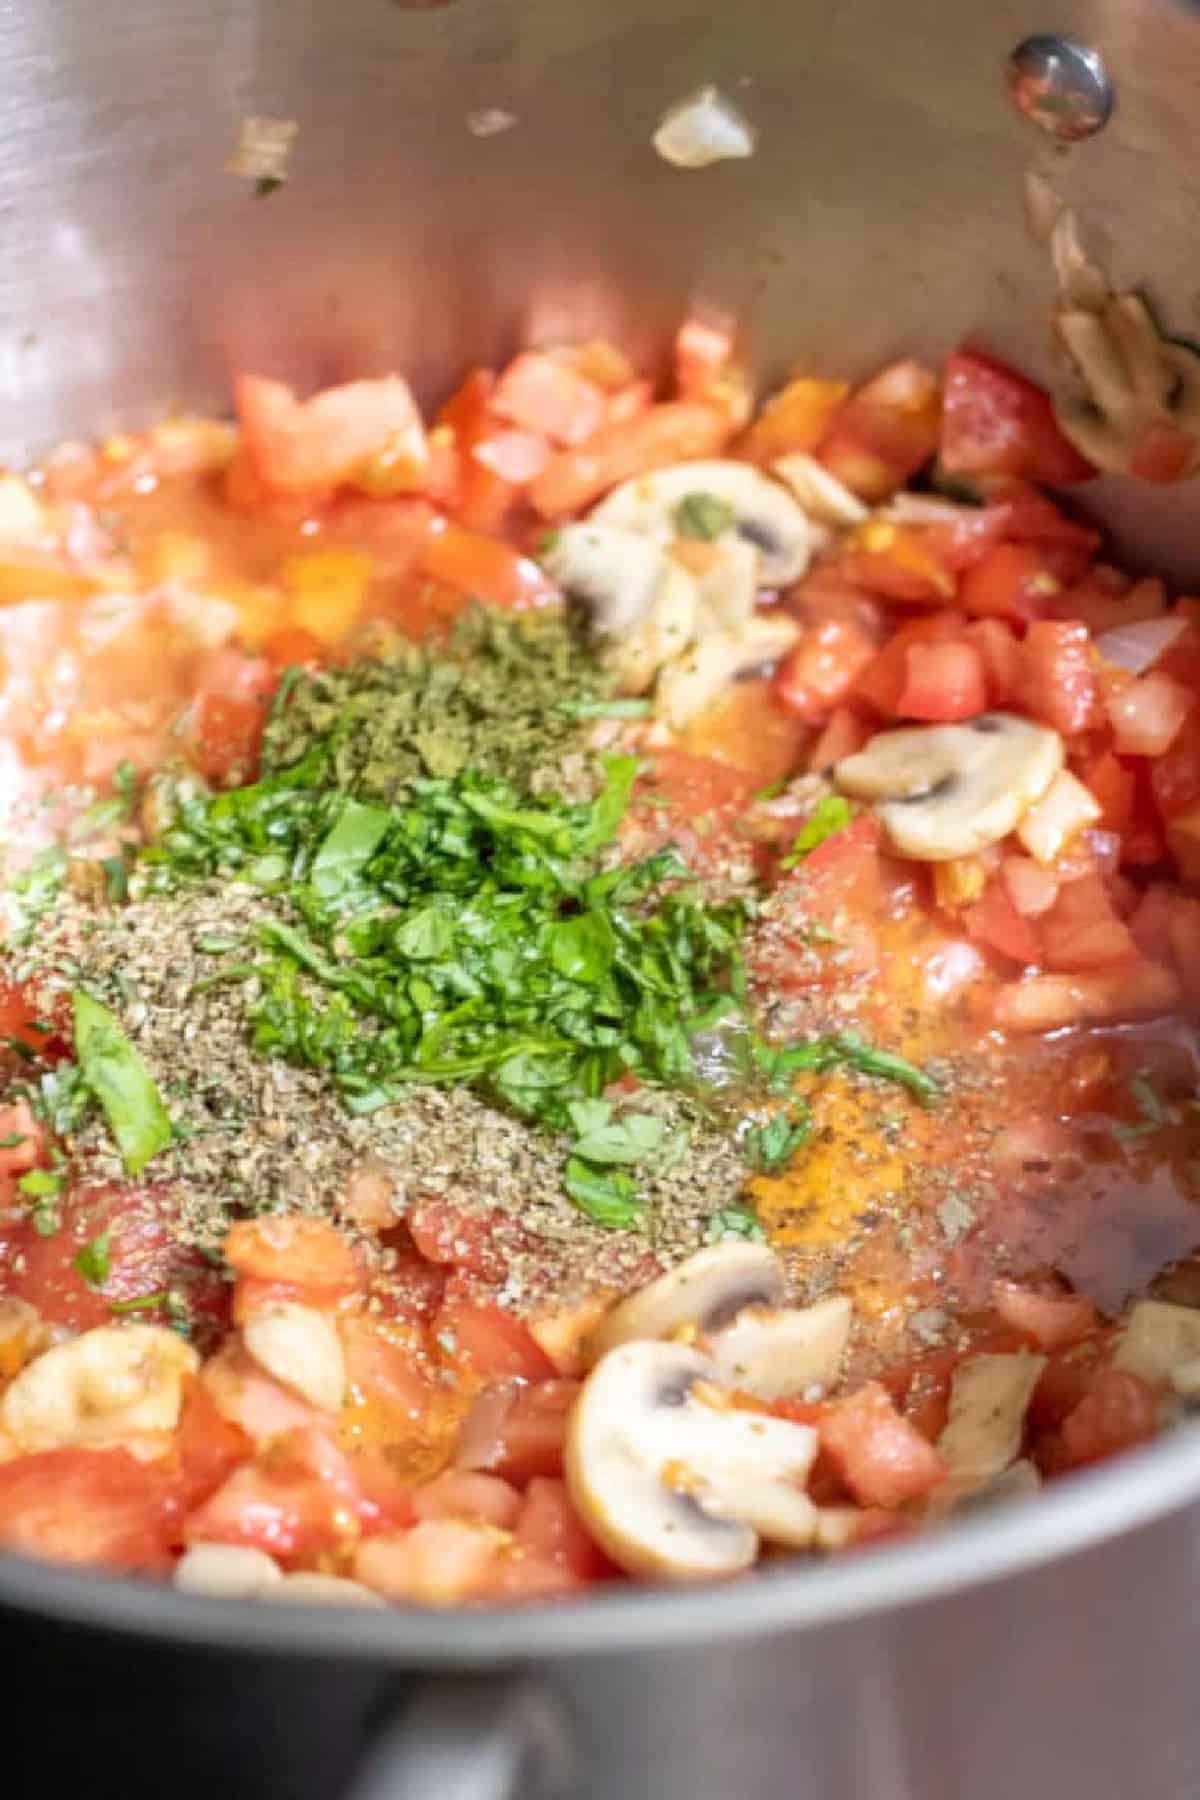 mushrooms, diced tomatoes in a pot with herbs.